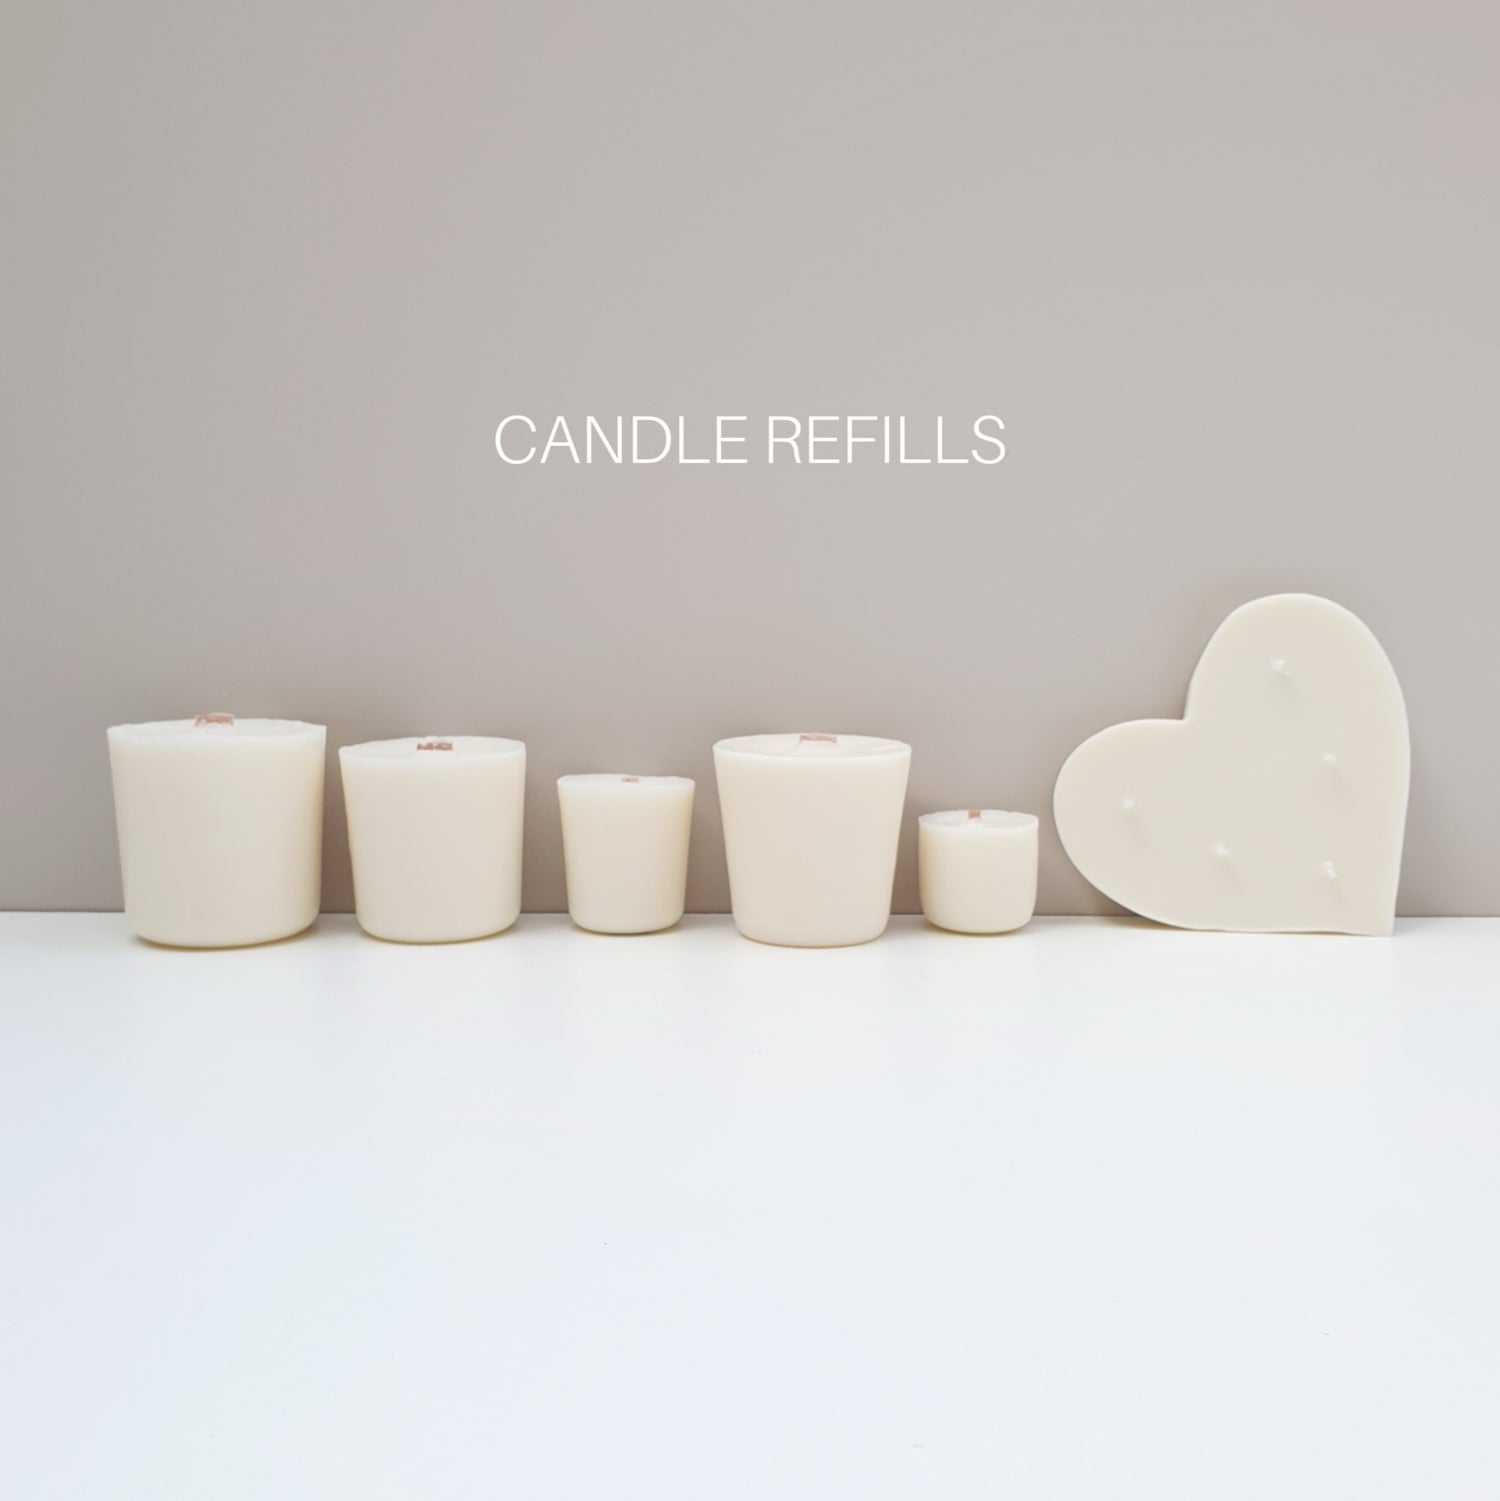 CANDLE REFILLS